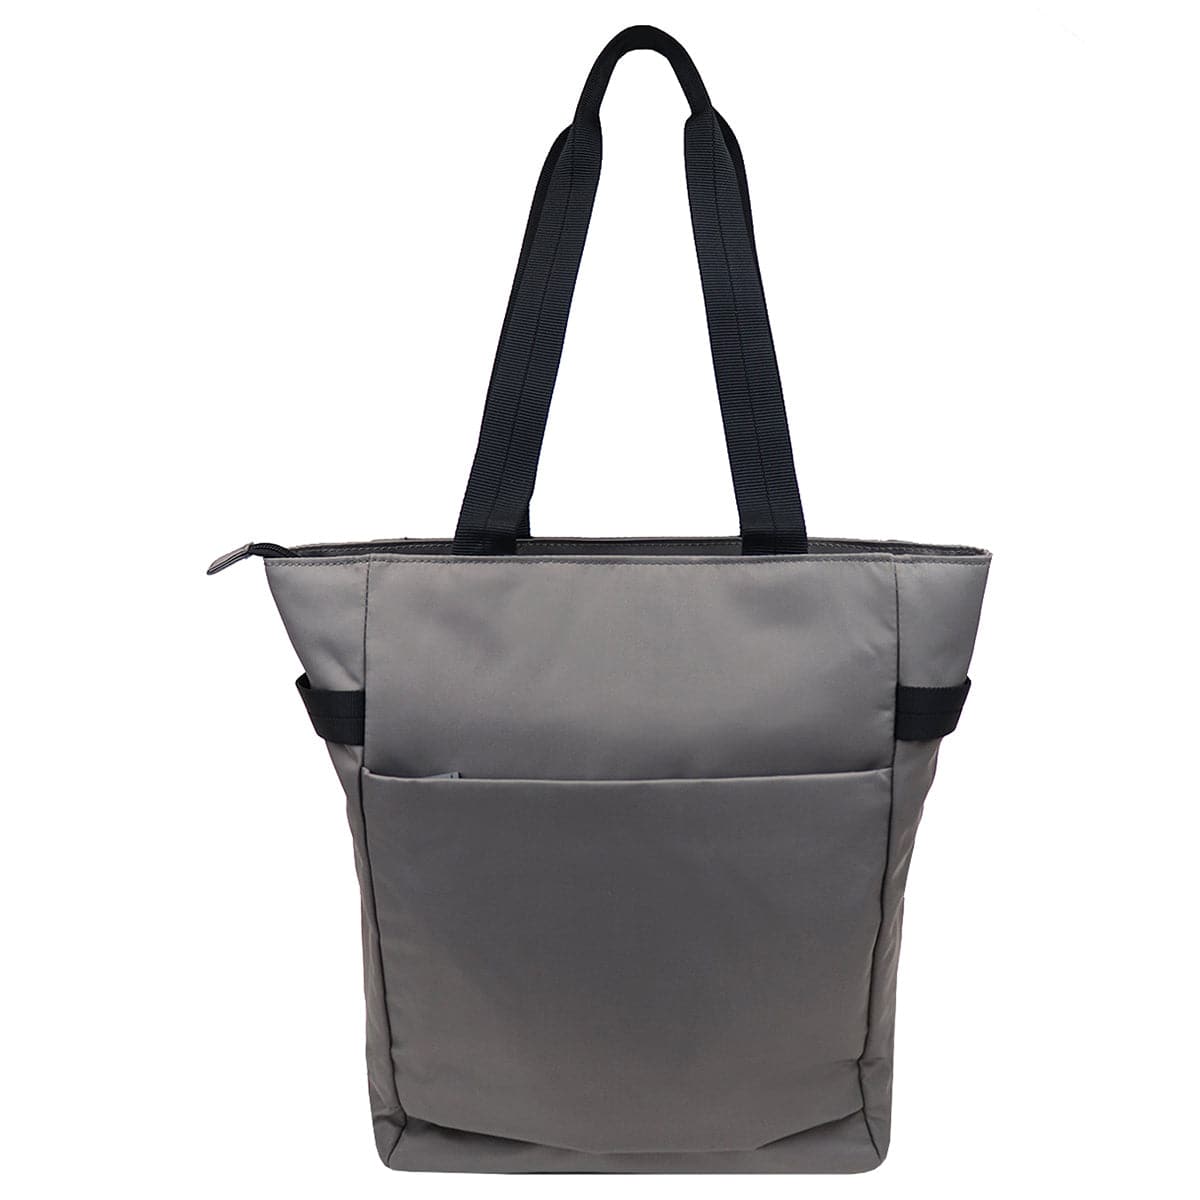 Hedgren Scurry Sustainably Made Tote Bag